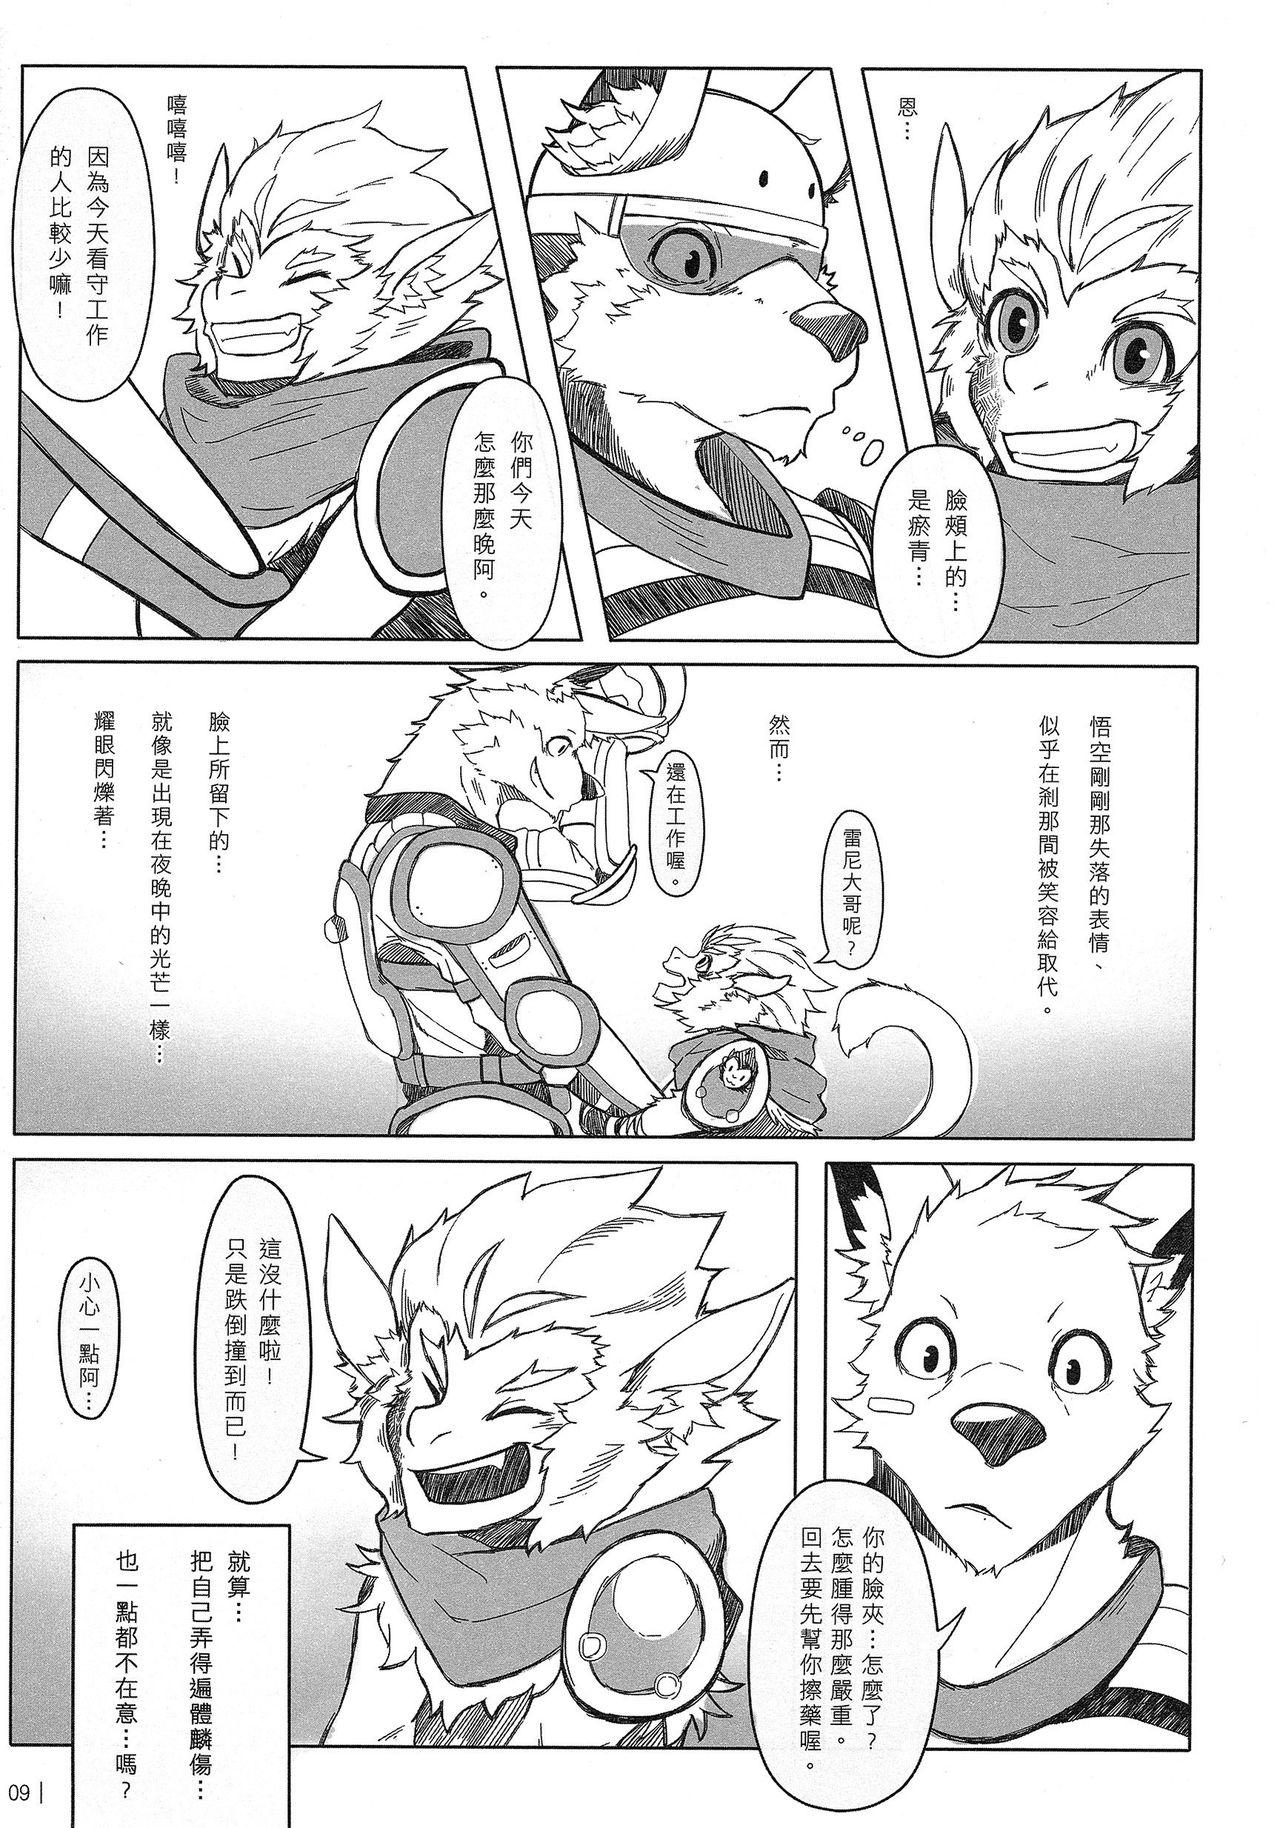 Lesbos 叛逆英雄 Rebel Hero - League of legends Thick - Page 10